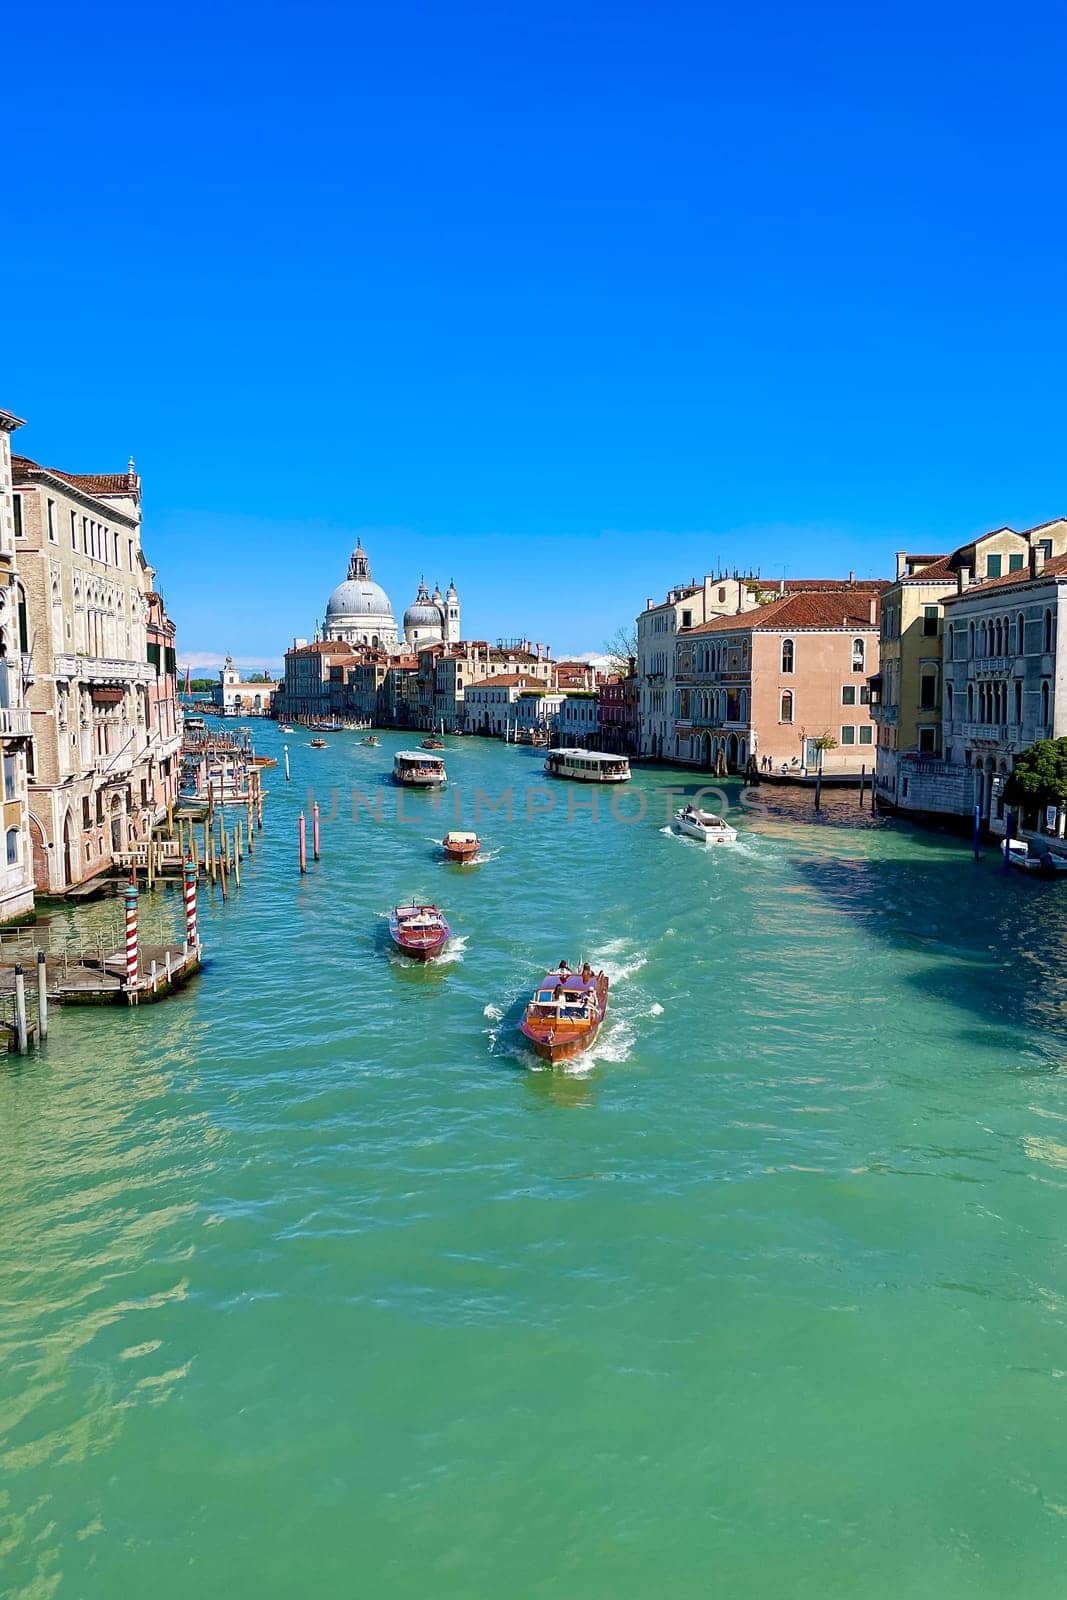 View on the Grand Canal, the most famous channel of Venice between the islands of the lagoon by MilaLazo